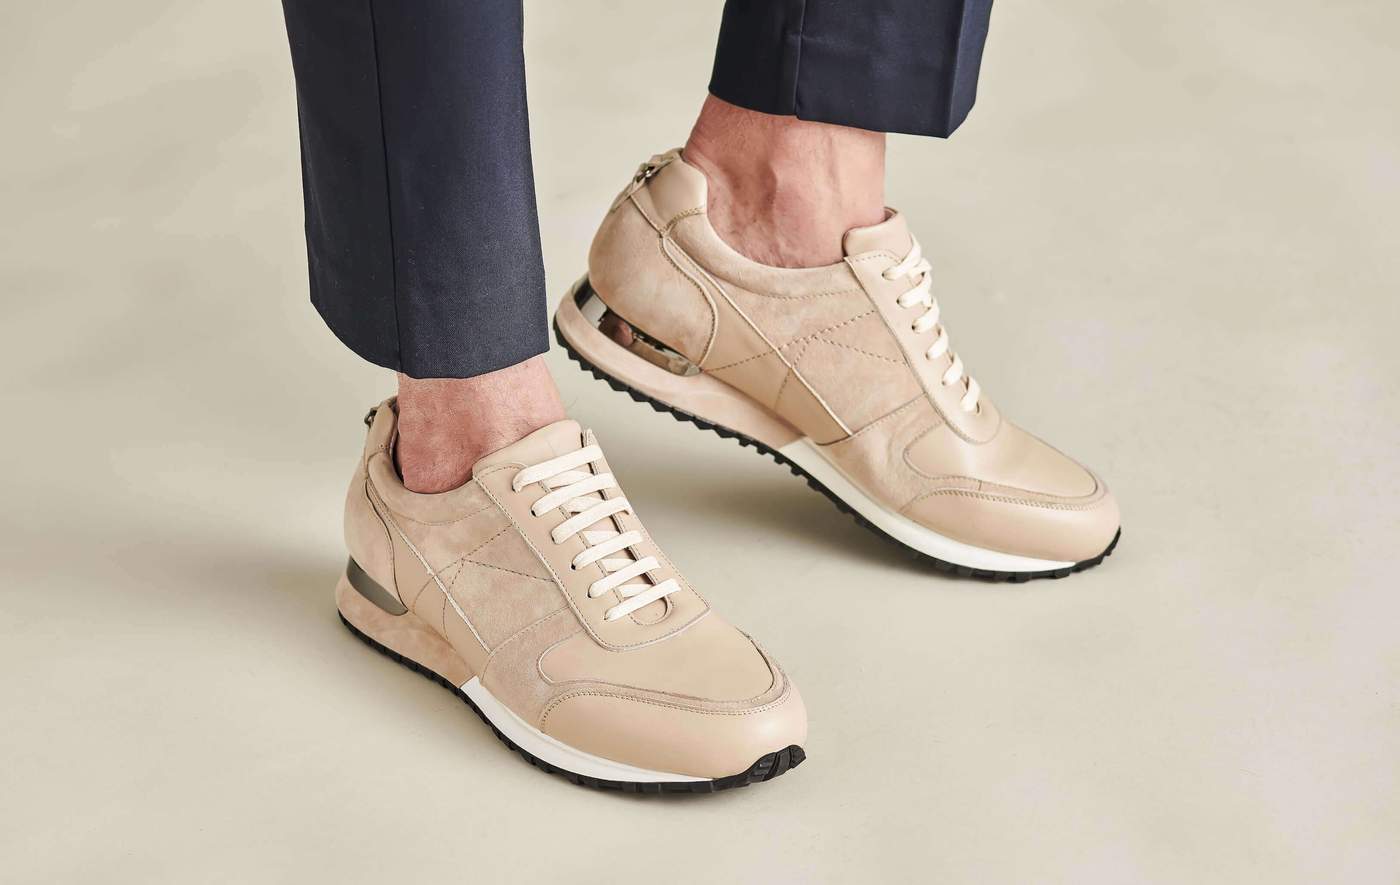 Best Leather Sneakers for Men Beyond the Basic White Sneaker - Marc Nolan